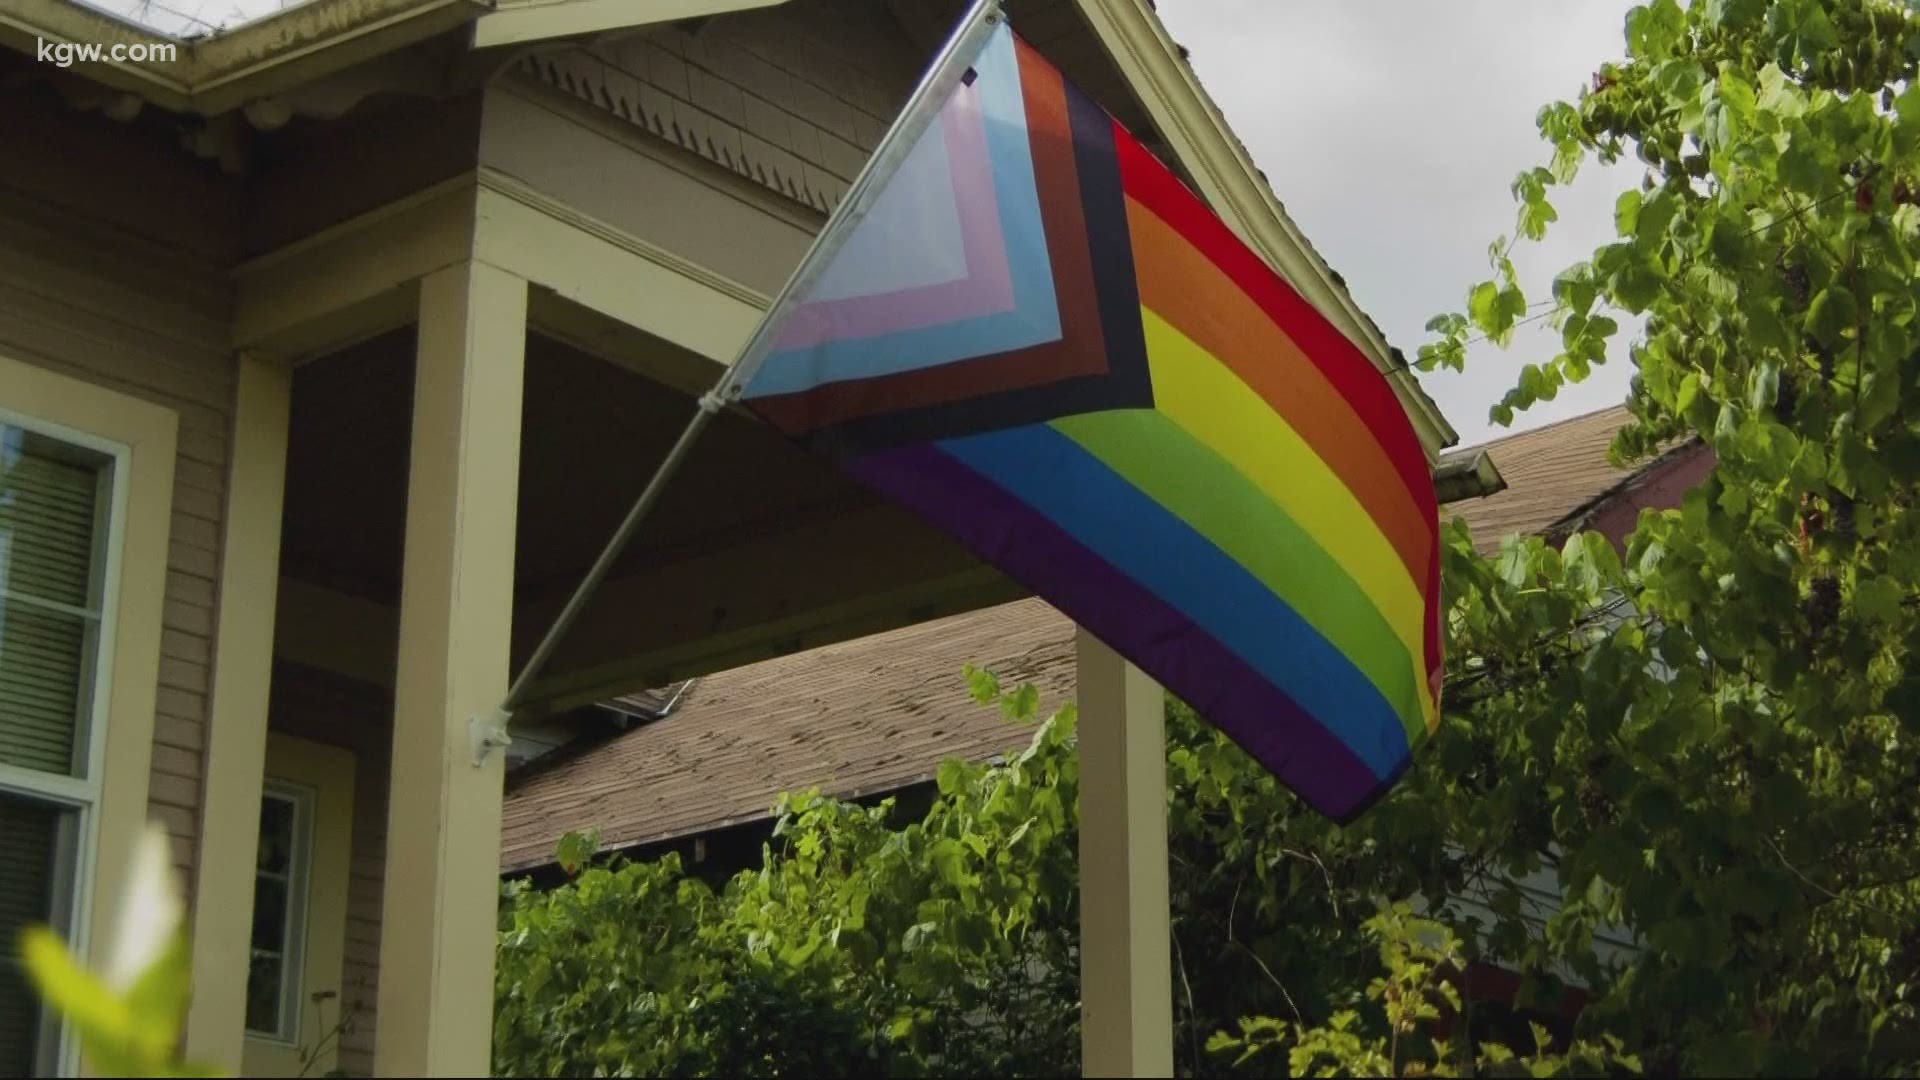 The Portland artist who designed the Progress Pride Flag was surprised when the flag popped up on RuPaul's Drag Race.